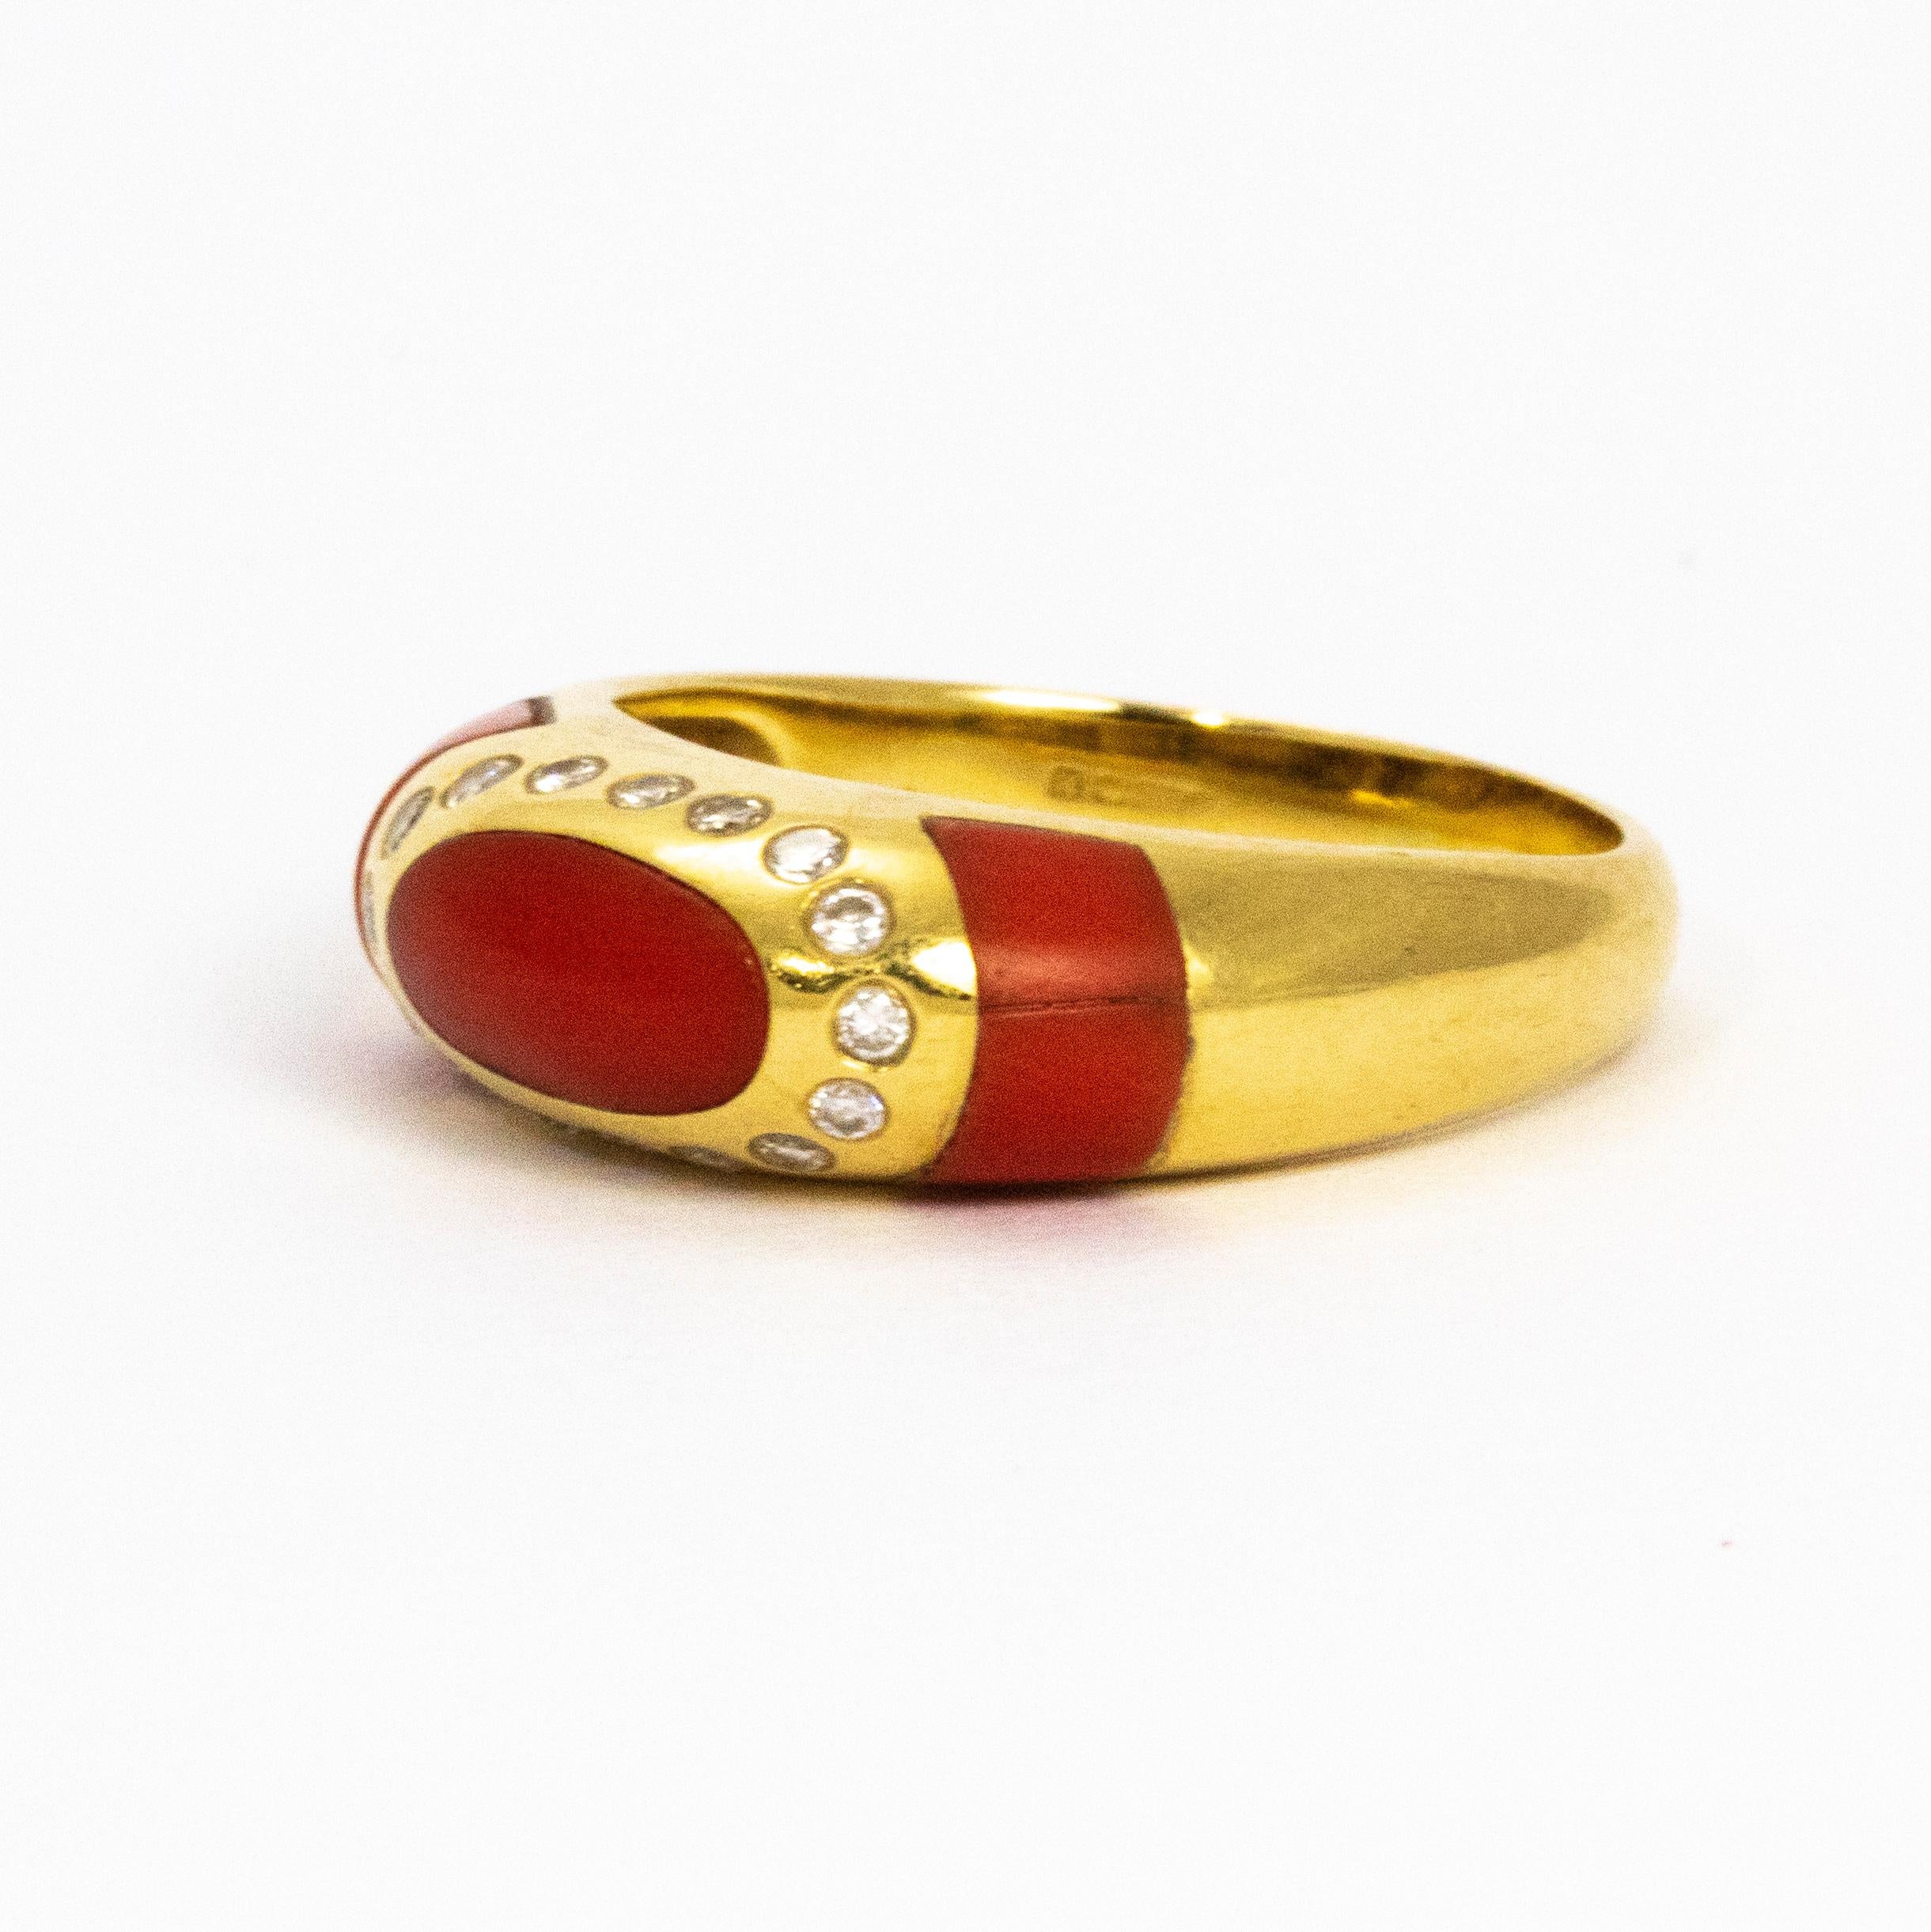 Bright and sparkling coral and diamond details all set in a smooth design 18ct gold band.

Ring Size: N 1/2 or 7